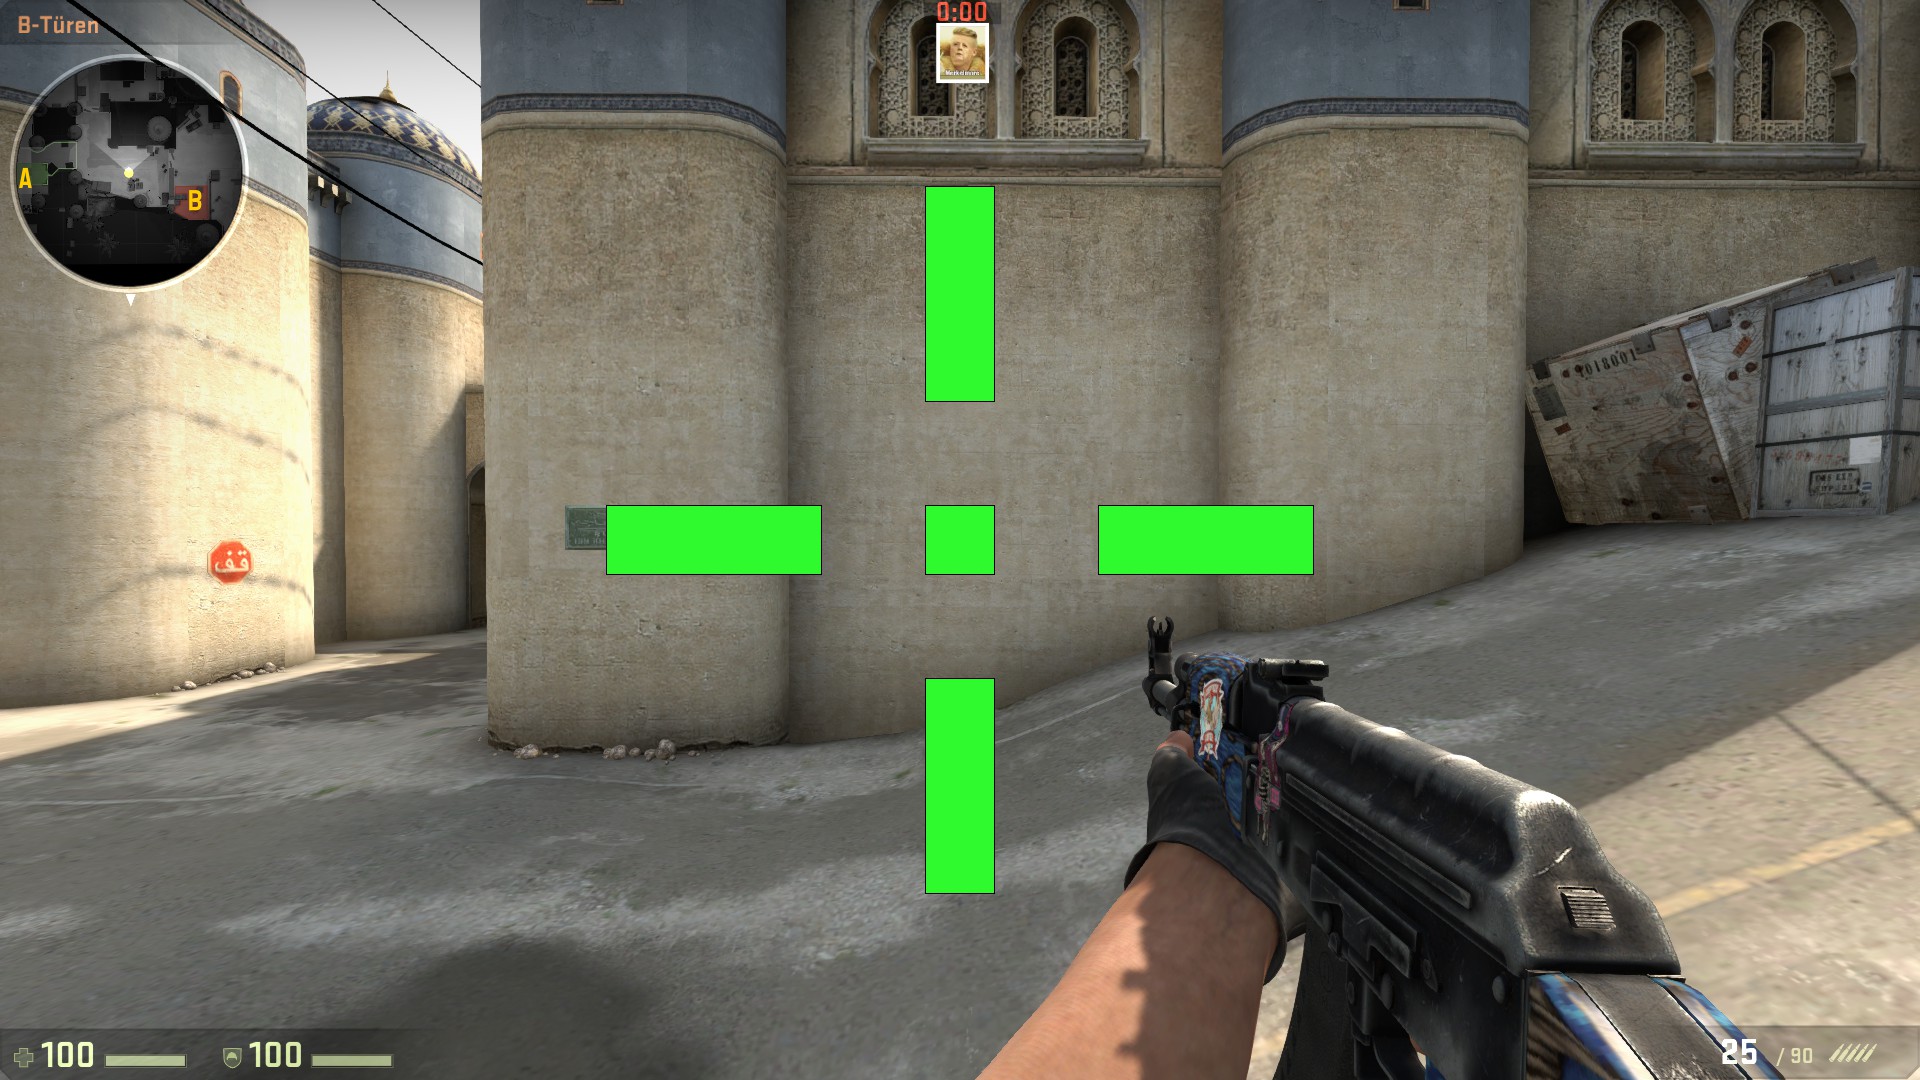 Frisør Føderale Krønike The Best CSGO Crosshairs (Used by Top 10 Best CSGO Players) | GAMERS DECIDE